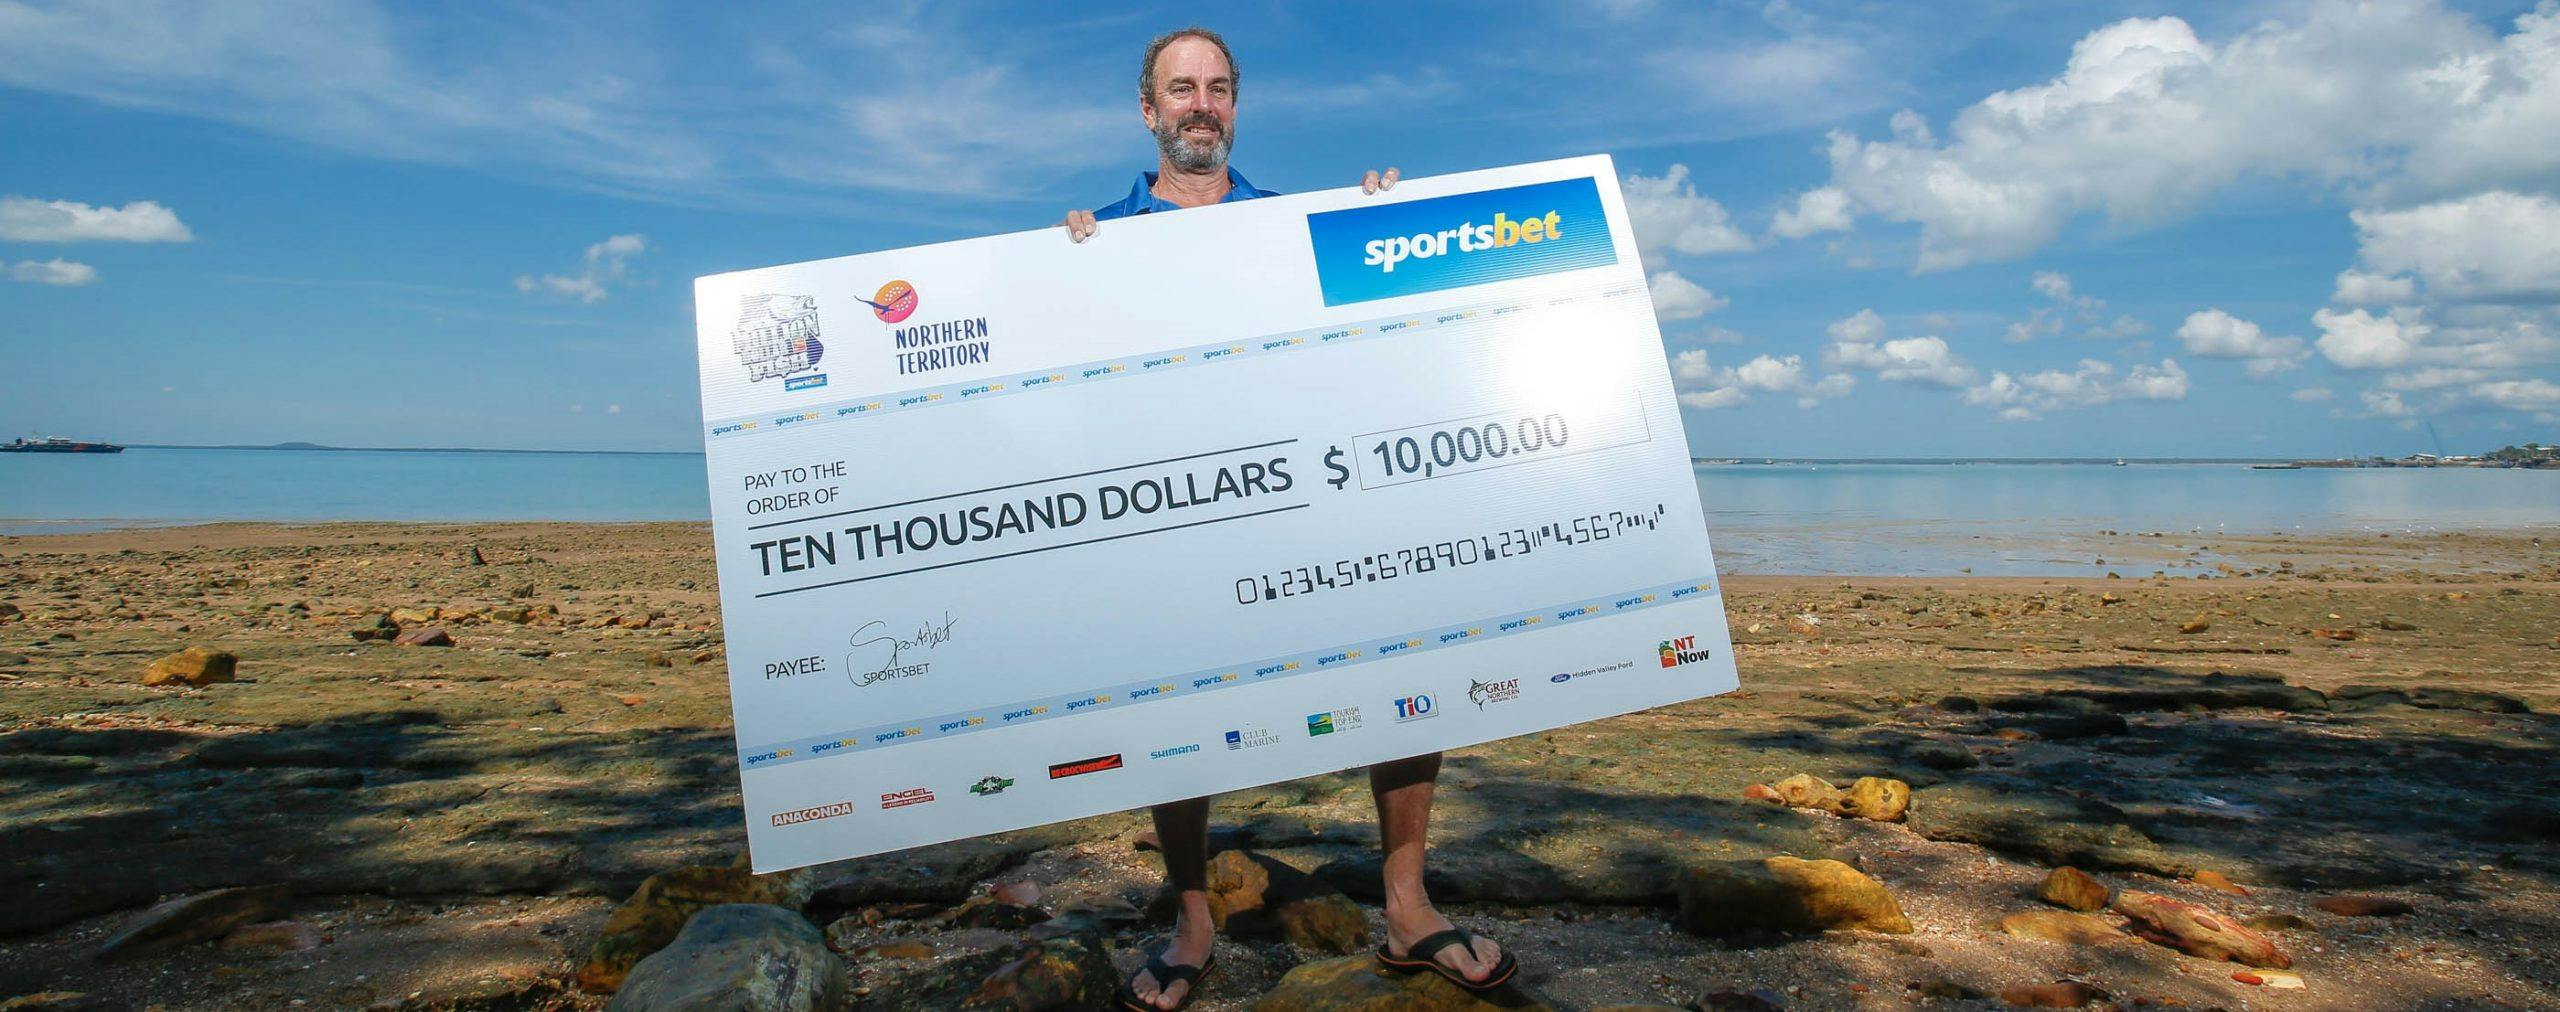 Man holding up $10,000 cheque at beach